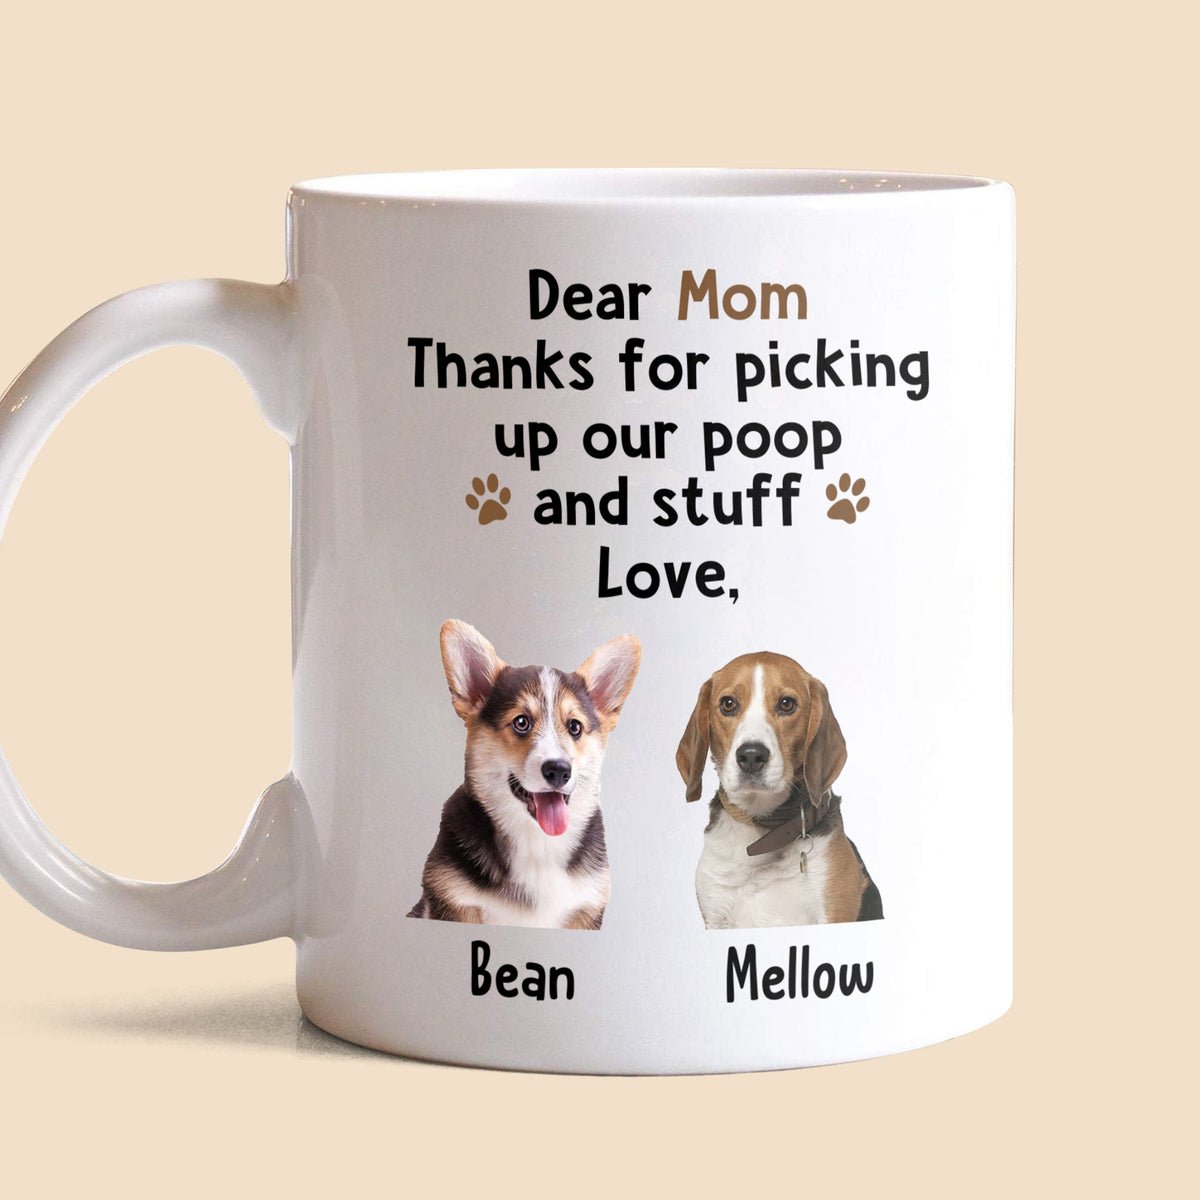 Dear Mom Thanks For Picking Up Our Stuff - Personalized White Mug - Best Gift For Dog Mom - Giftago